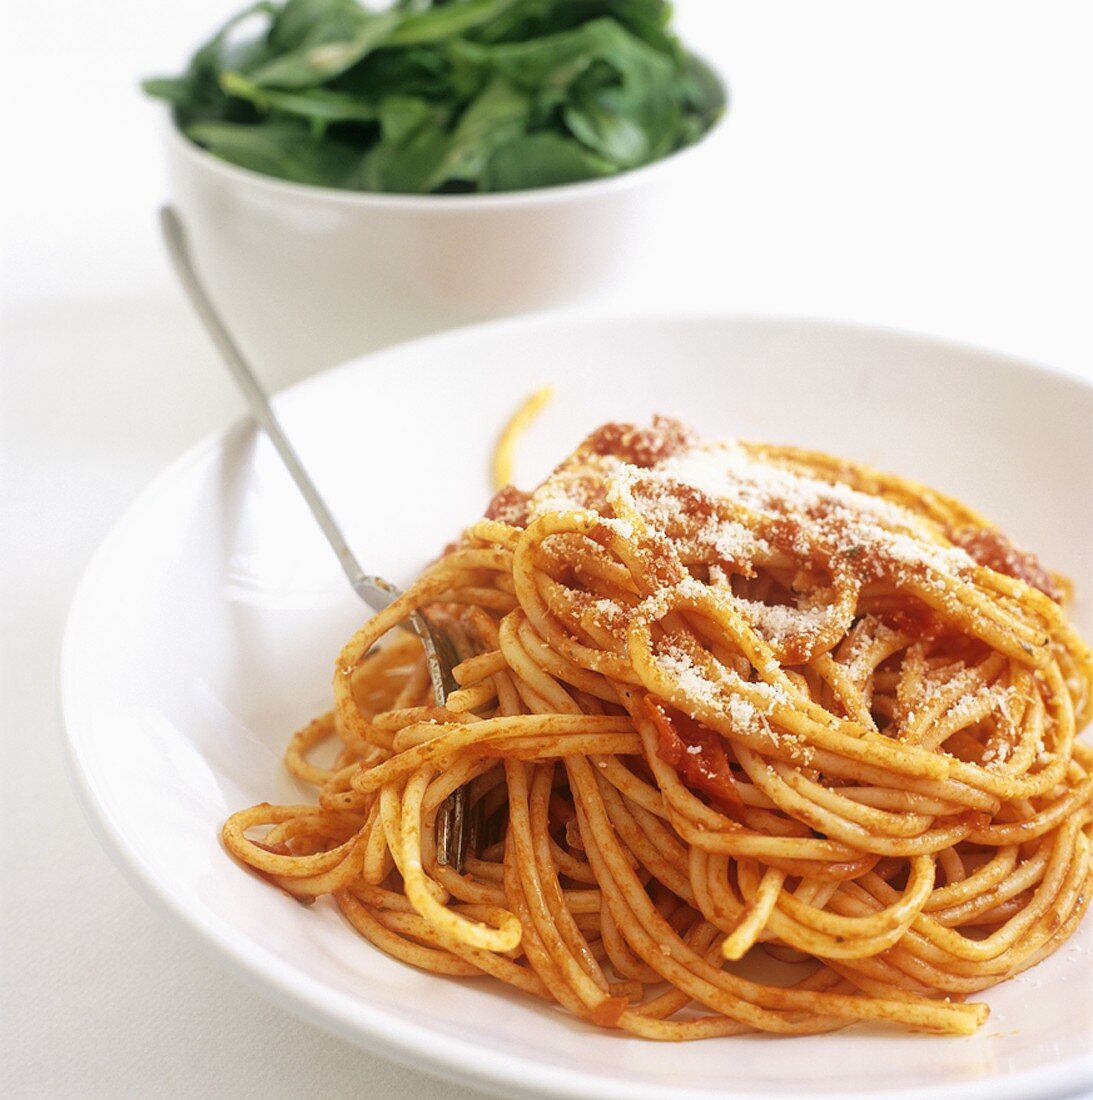 Spaghetti with tomato sauce and Parmesan